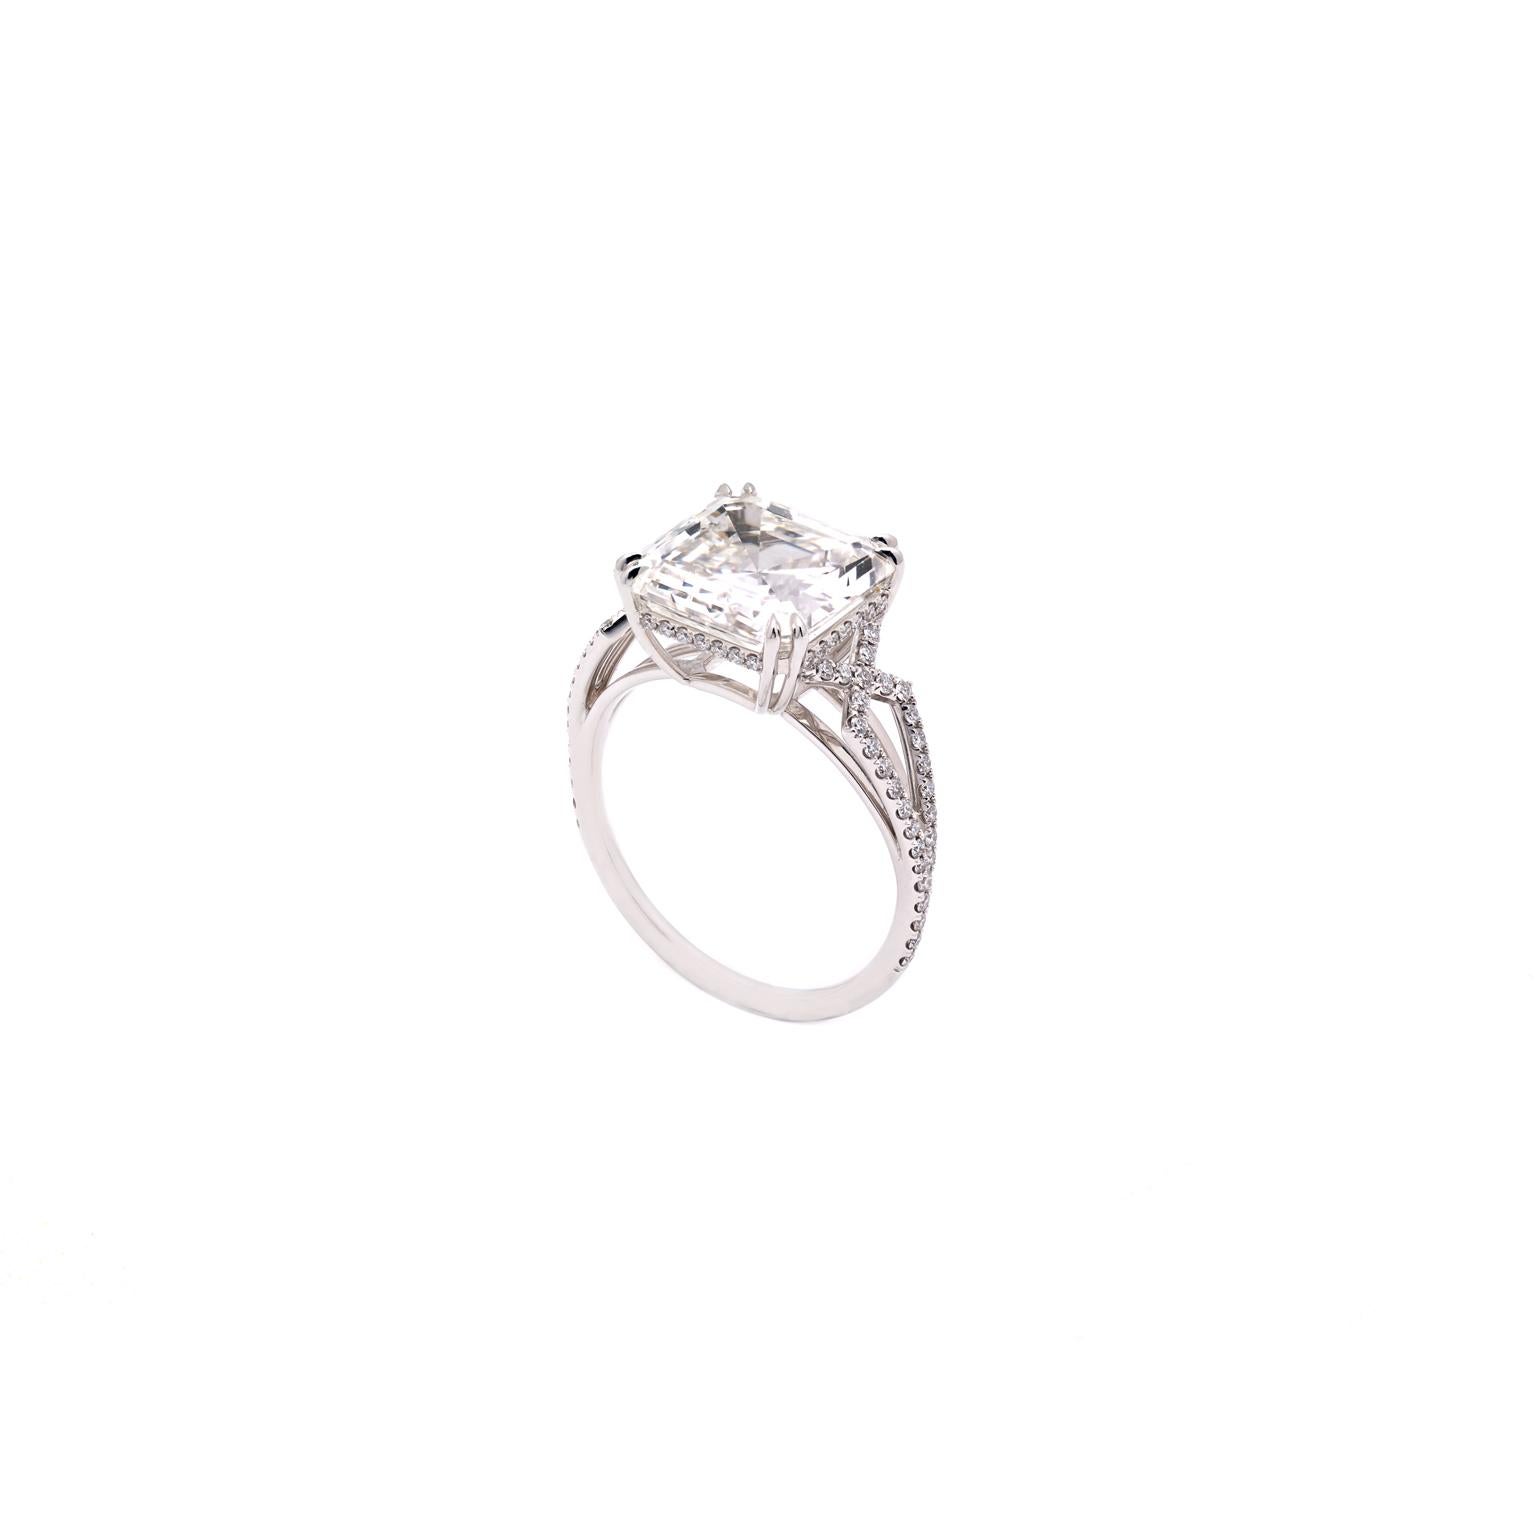 Part of The One Collection wich gathers unique creations, the design of the ring is inspired by the gothic cathedrals. Hand crafted mounts a GIA certified 5 ct. white diamond, asscher cut, G color, VS1. On the ring are set 0.31 ct of white F color